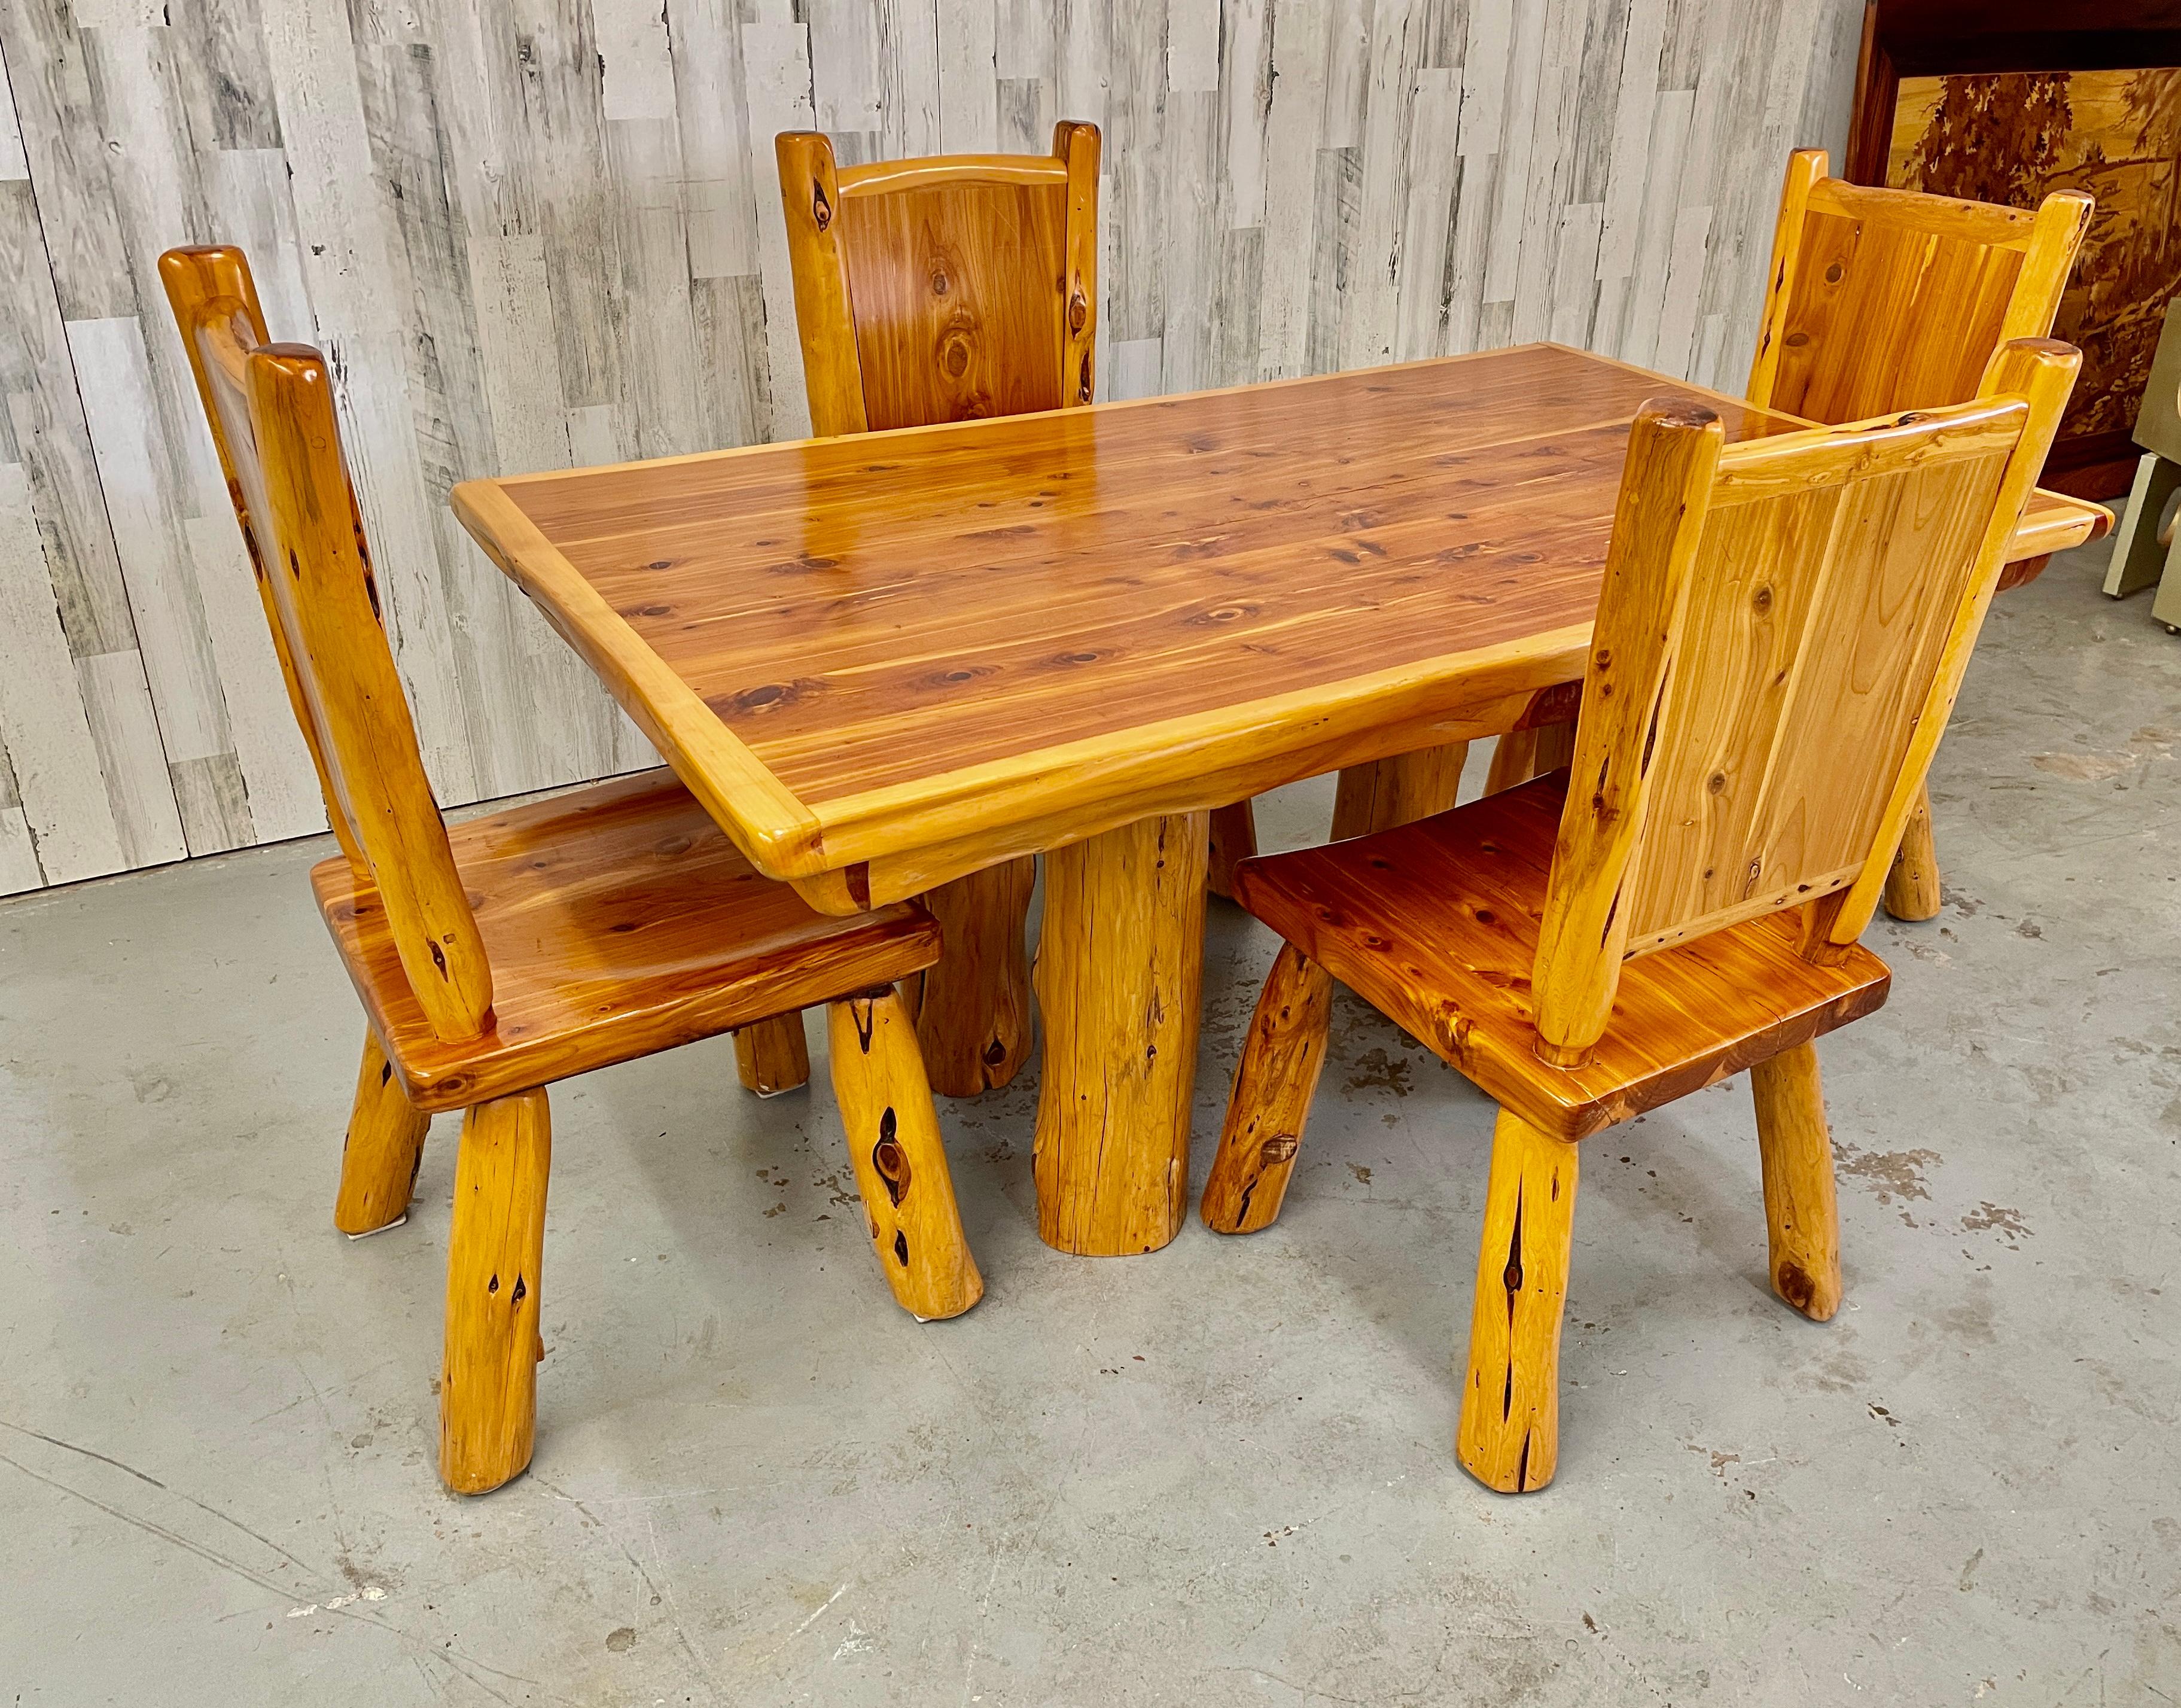 Solid Lodge pole pine table with a scuplted live edge and four sprawled leg chairs 
Very durable for any cabin or lodge.